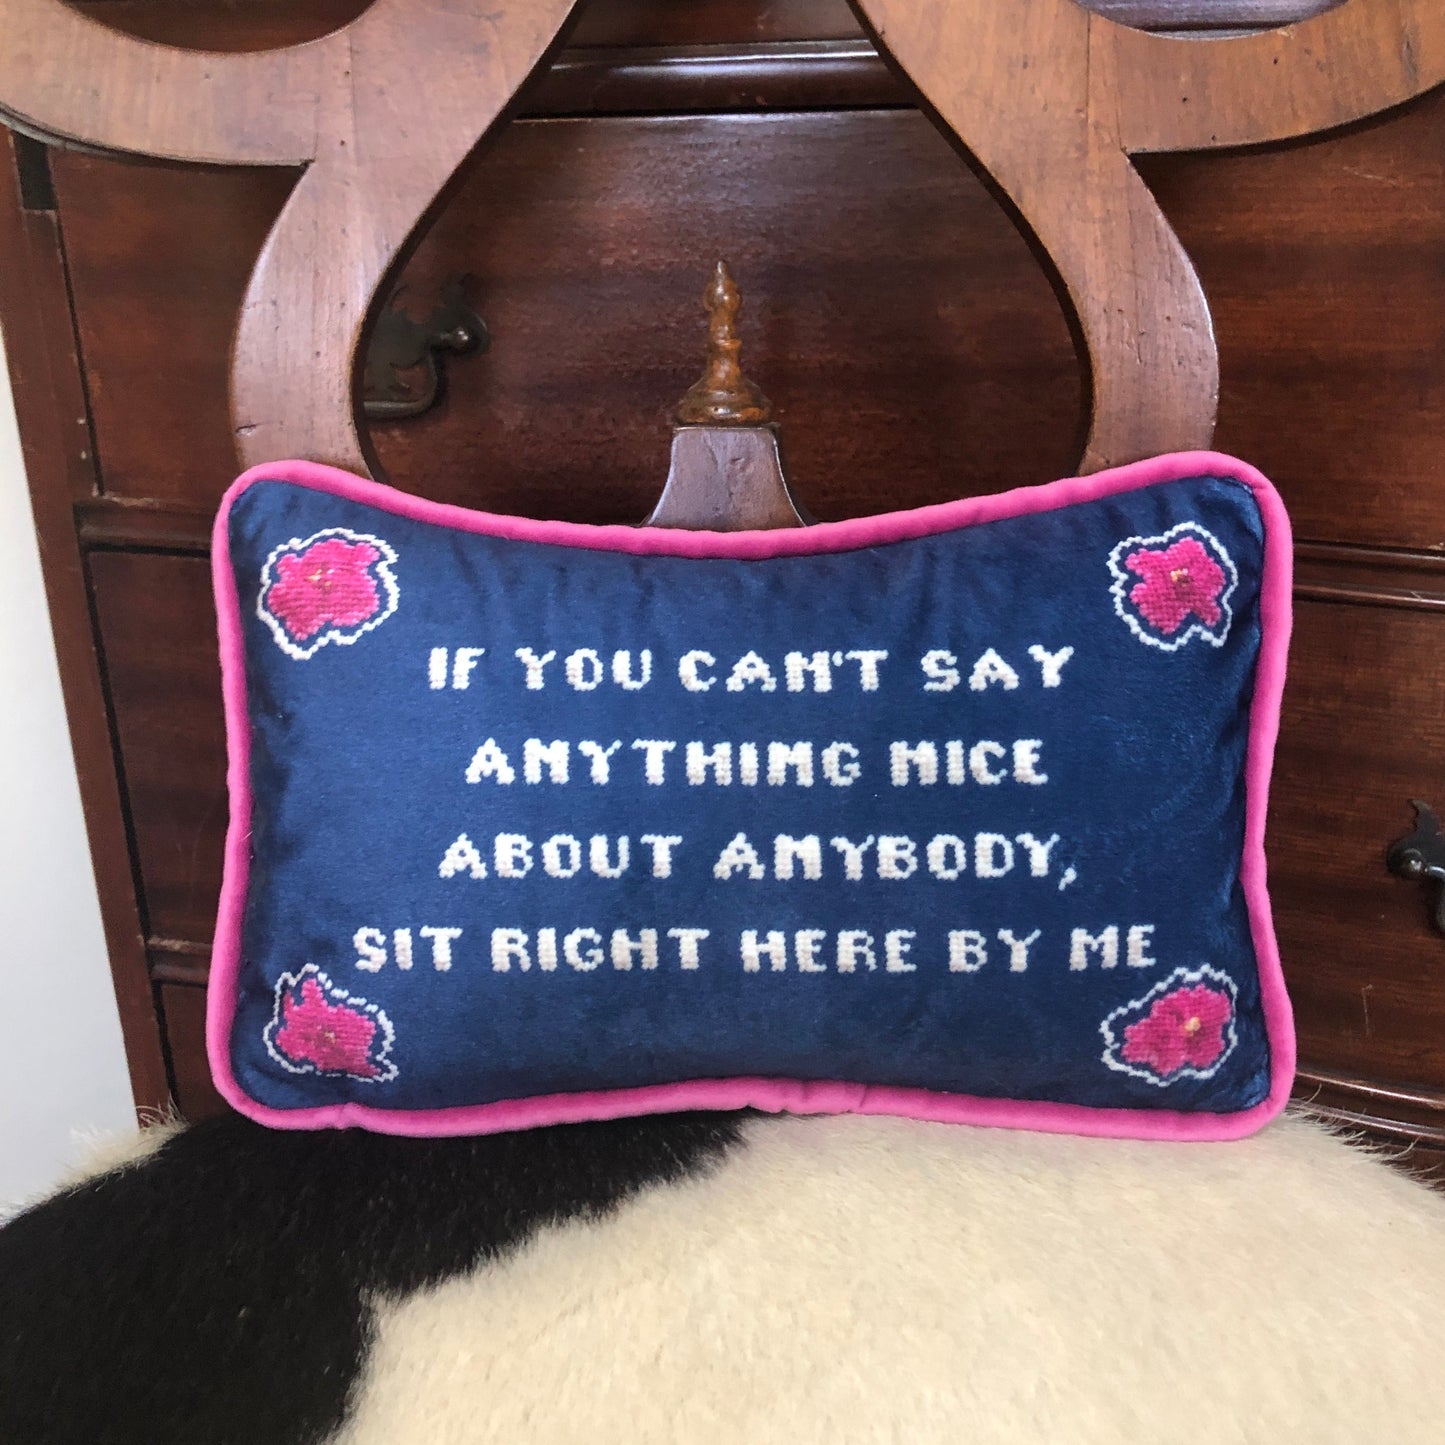 "If you can't say anything nice about anybody, sit right here by my" pillow with pink flowers in the corners and ink blue background.